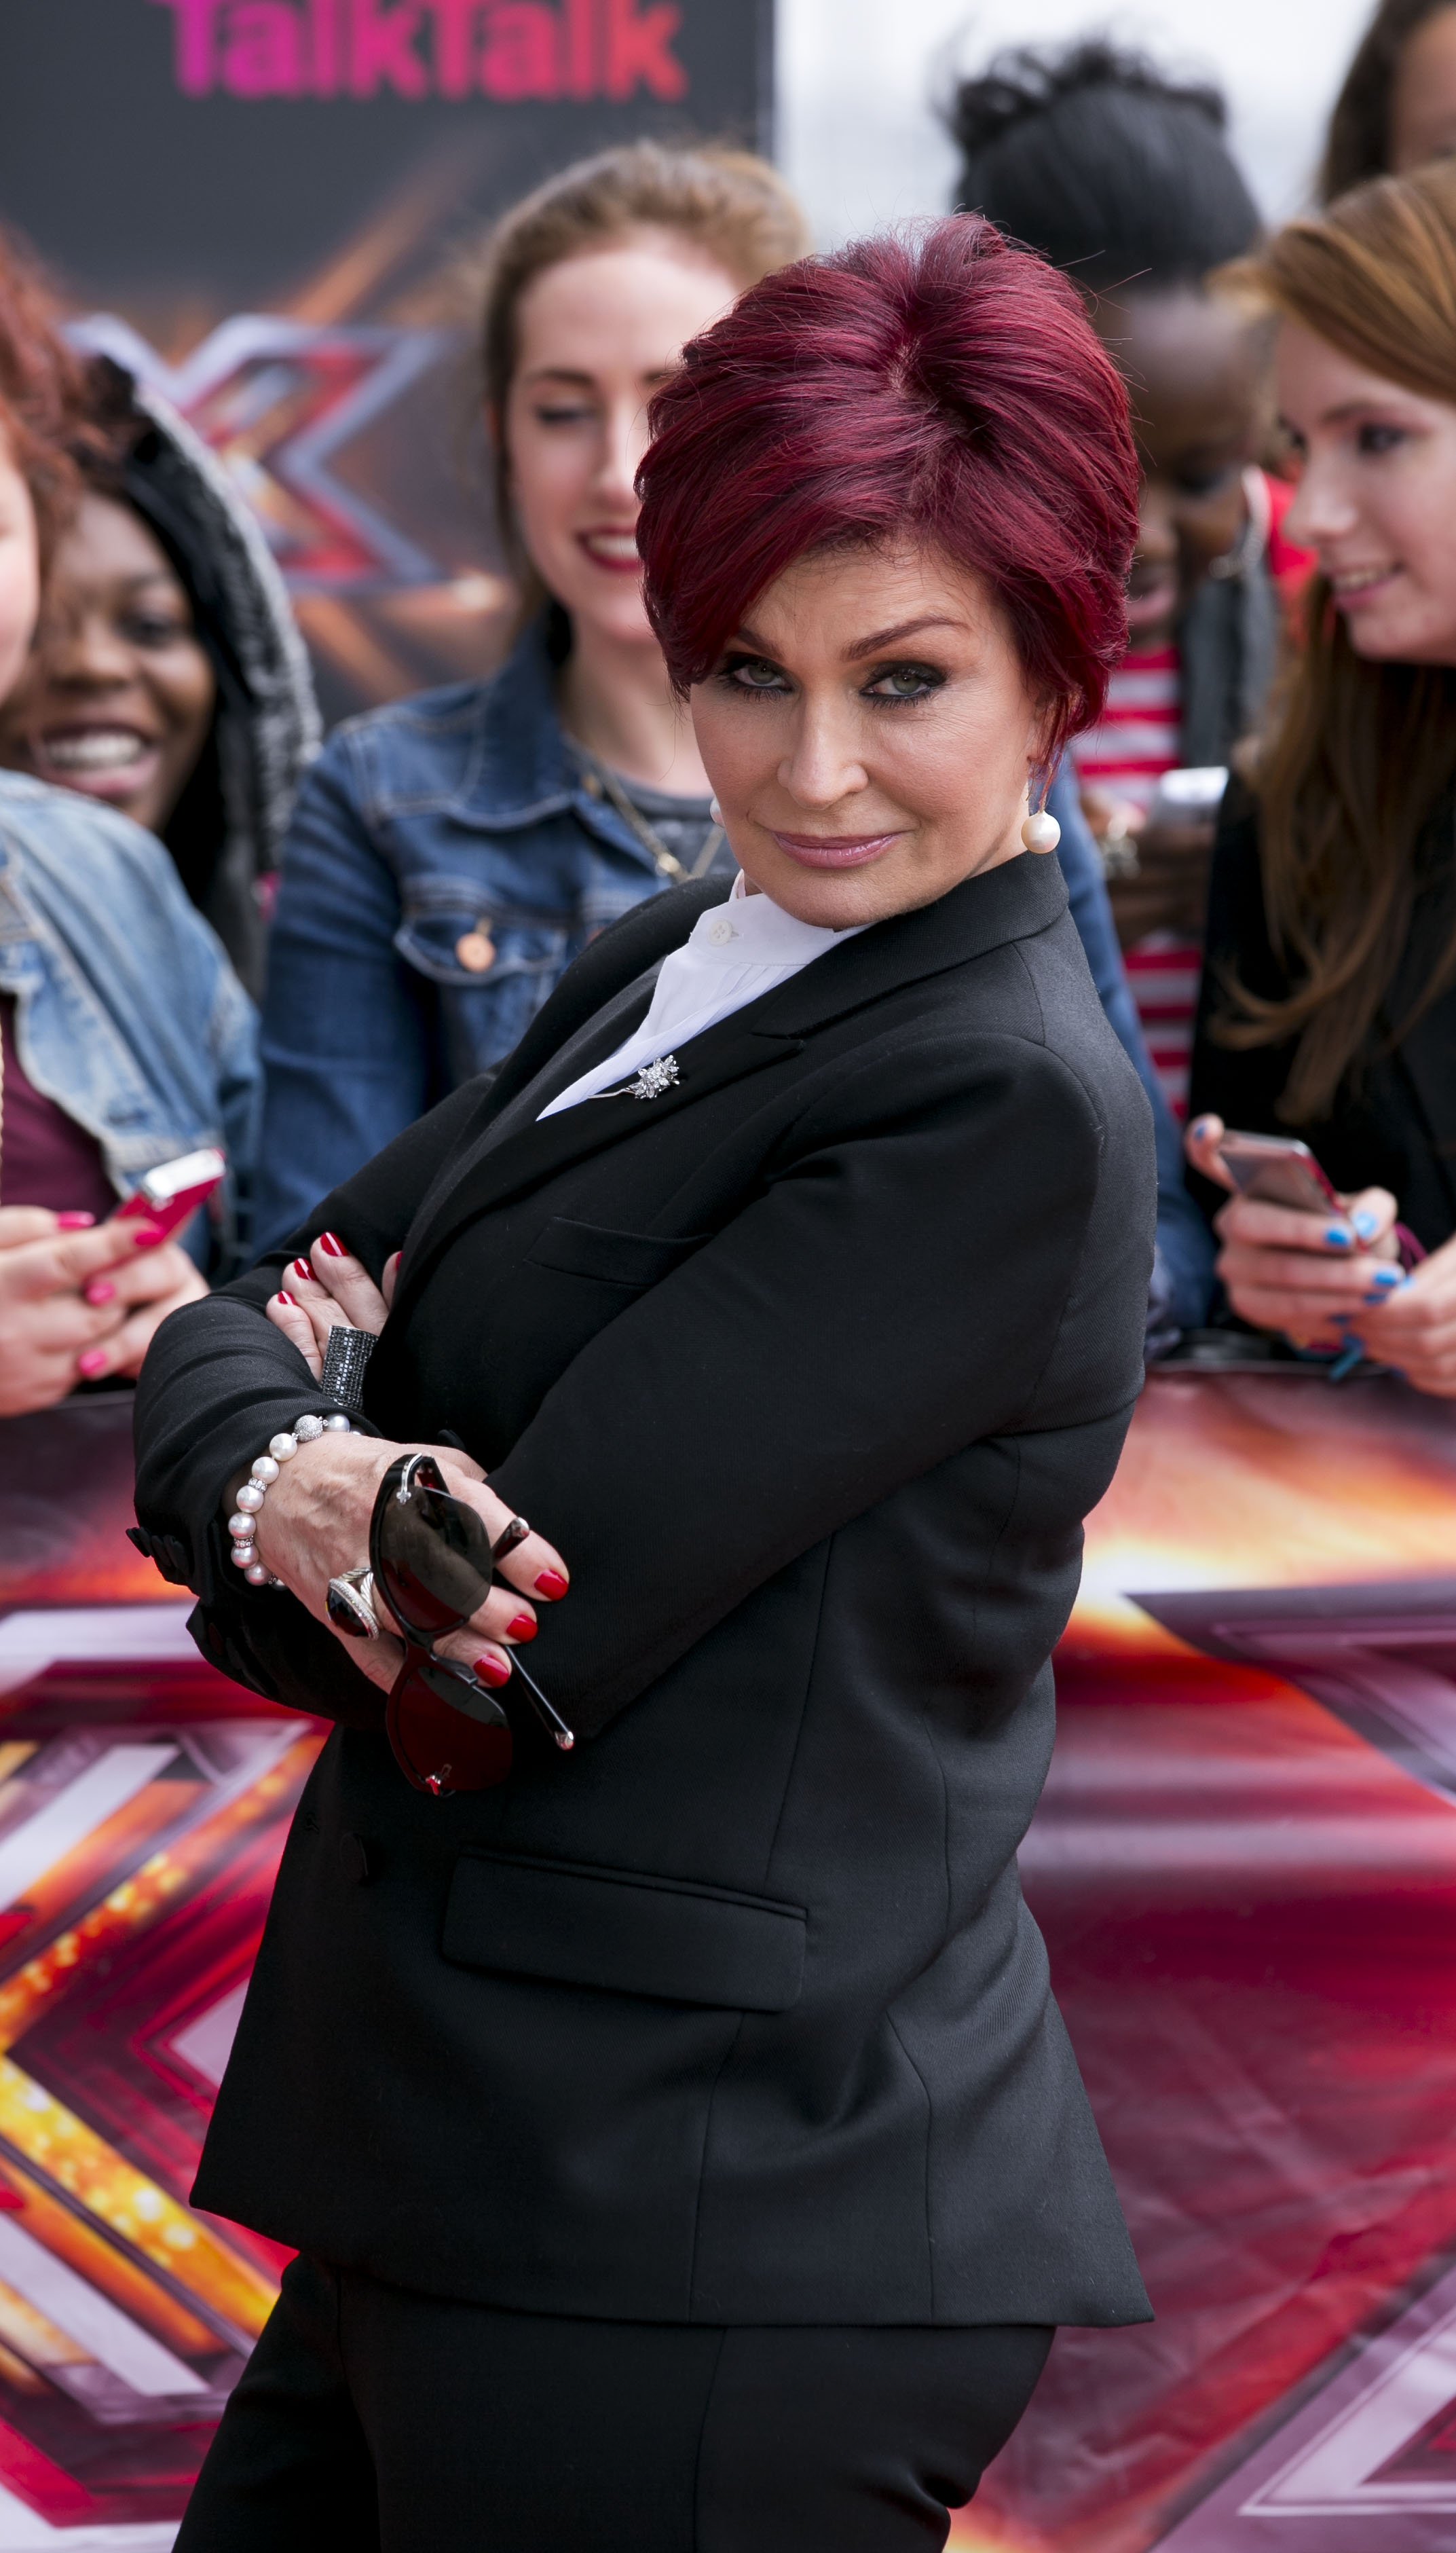 Sharon Osbourne arrives for the "X Factor" London audition in England on June 19, 2013 | Photo: Getty Images